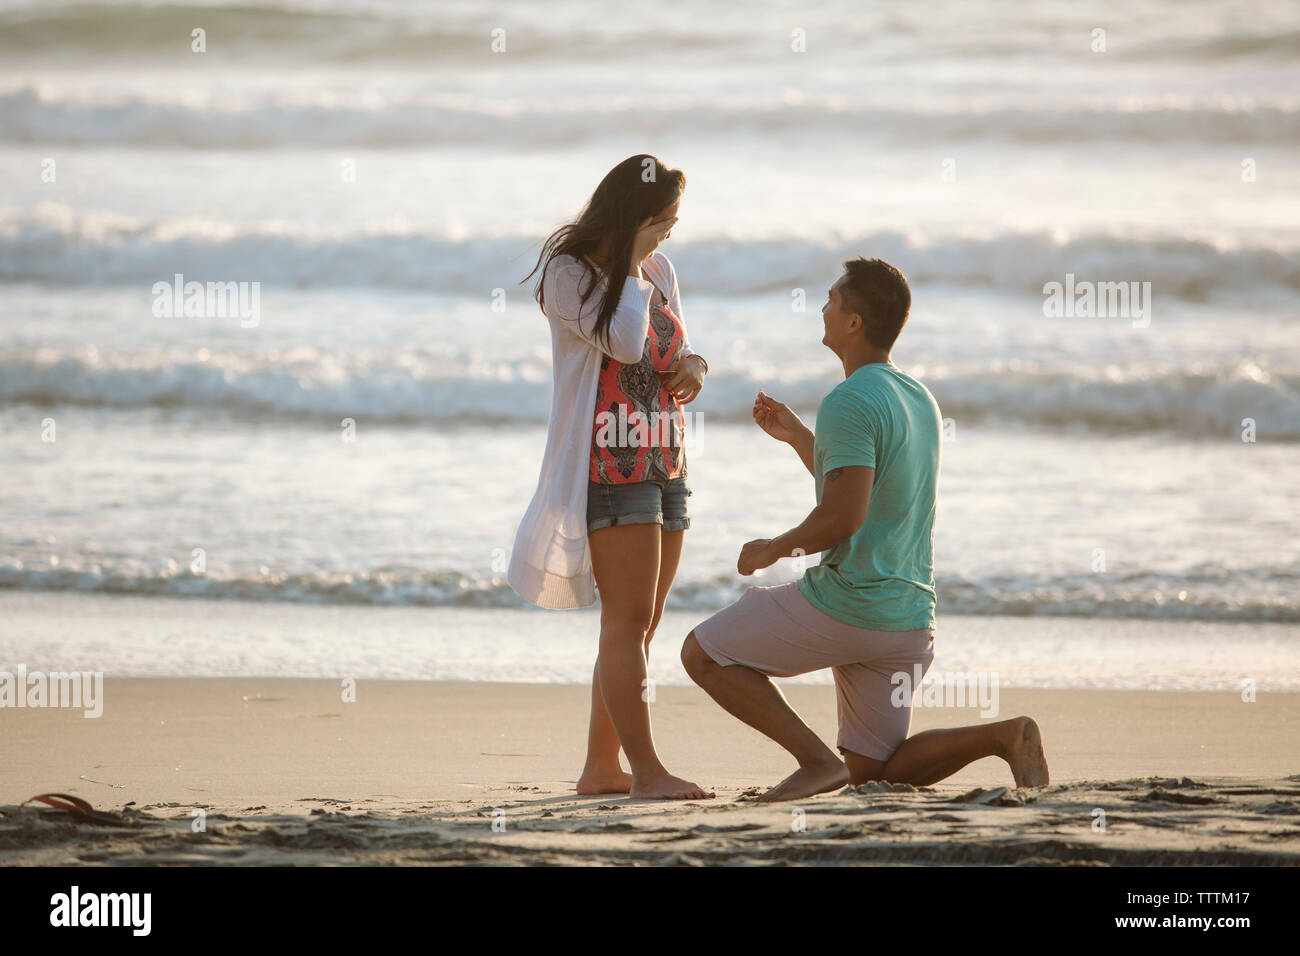 Ultimate Collection of 999+ Romantic 4K Proposal Images for Boyfriend